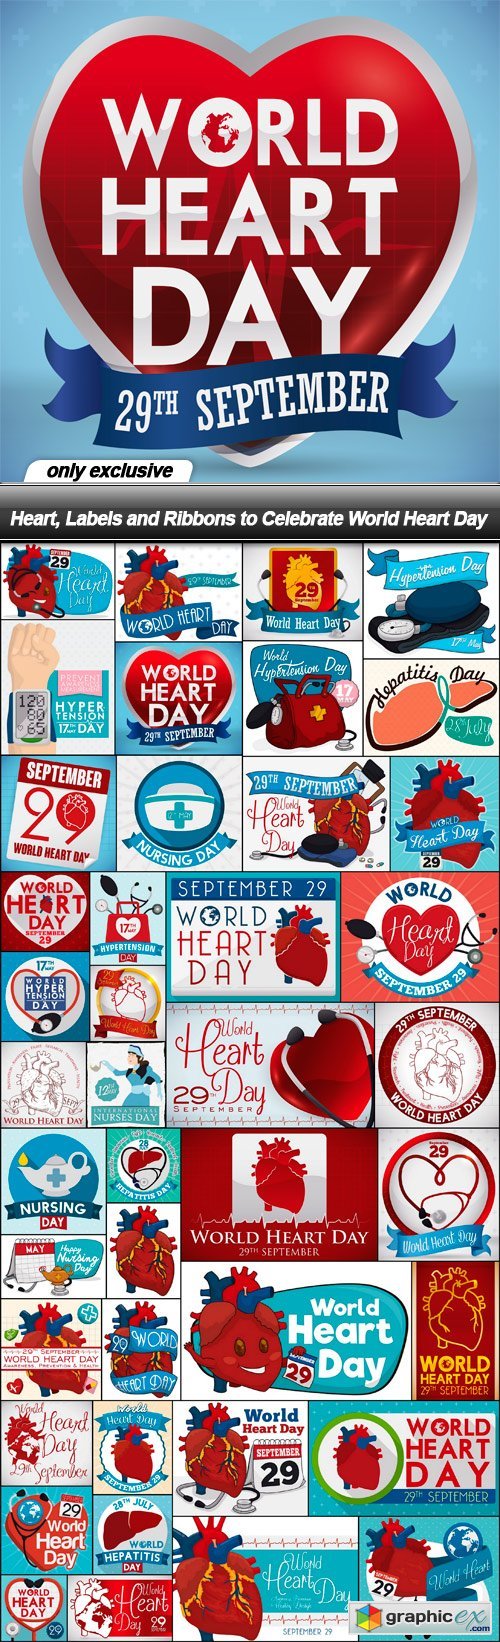 Heart, Labels and Ribbons to Celebrate World Heart Day - 42 EPS